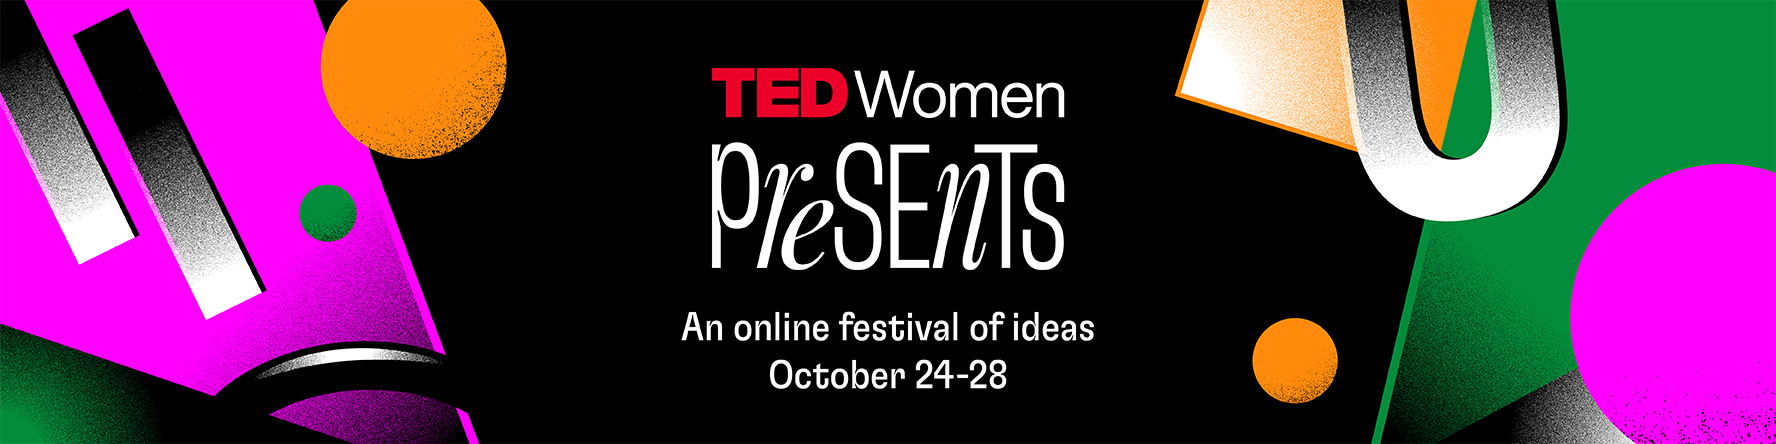 How you can join the TEDWomen community